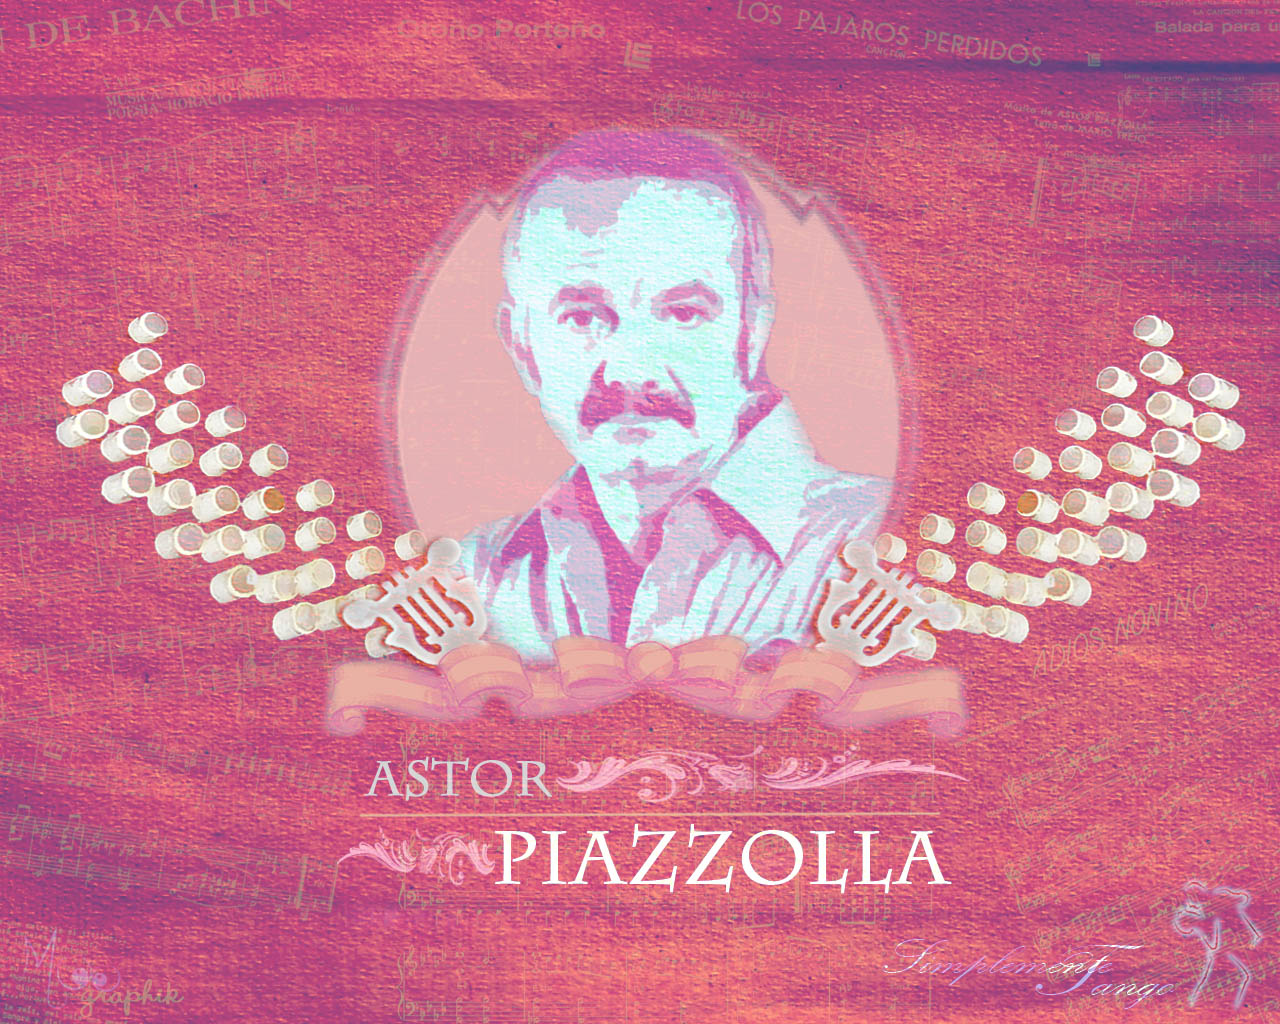 piazzolla